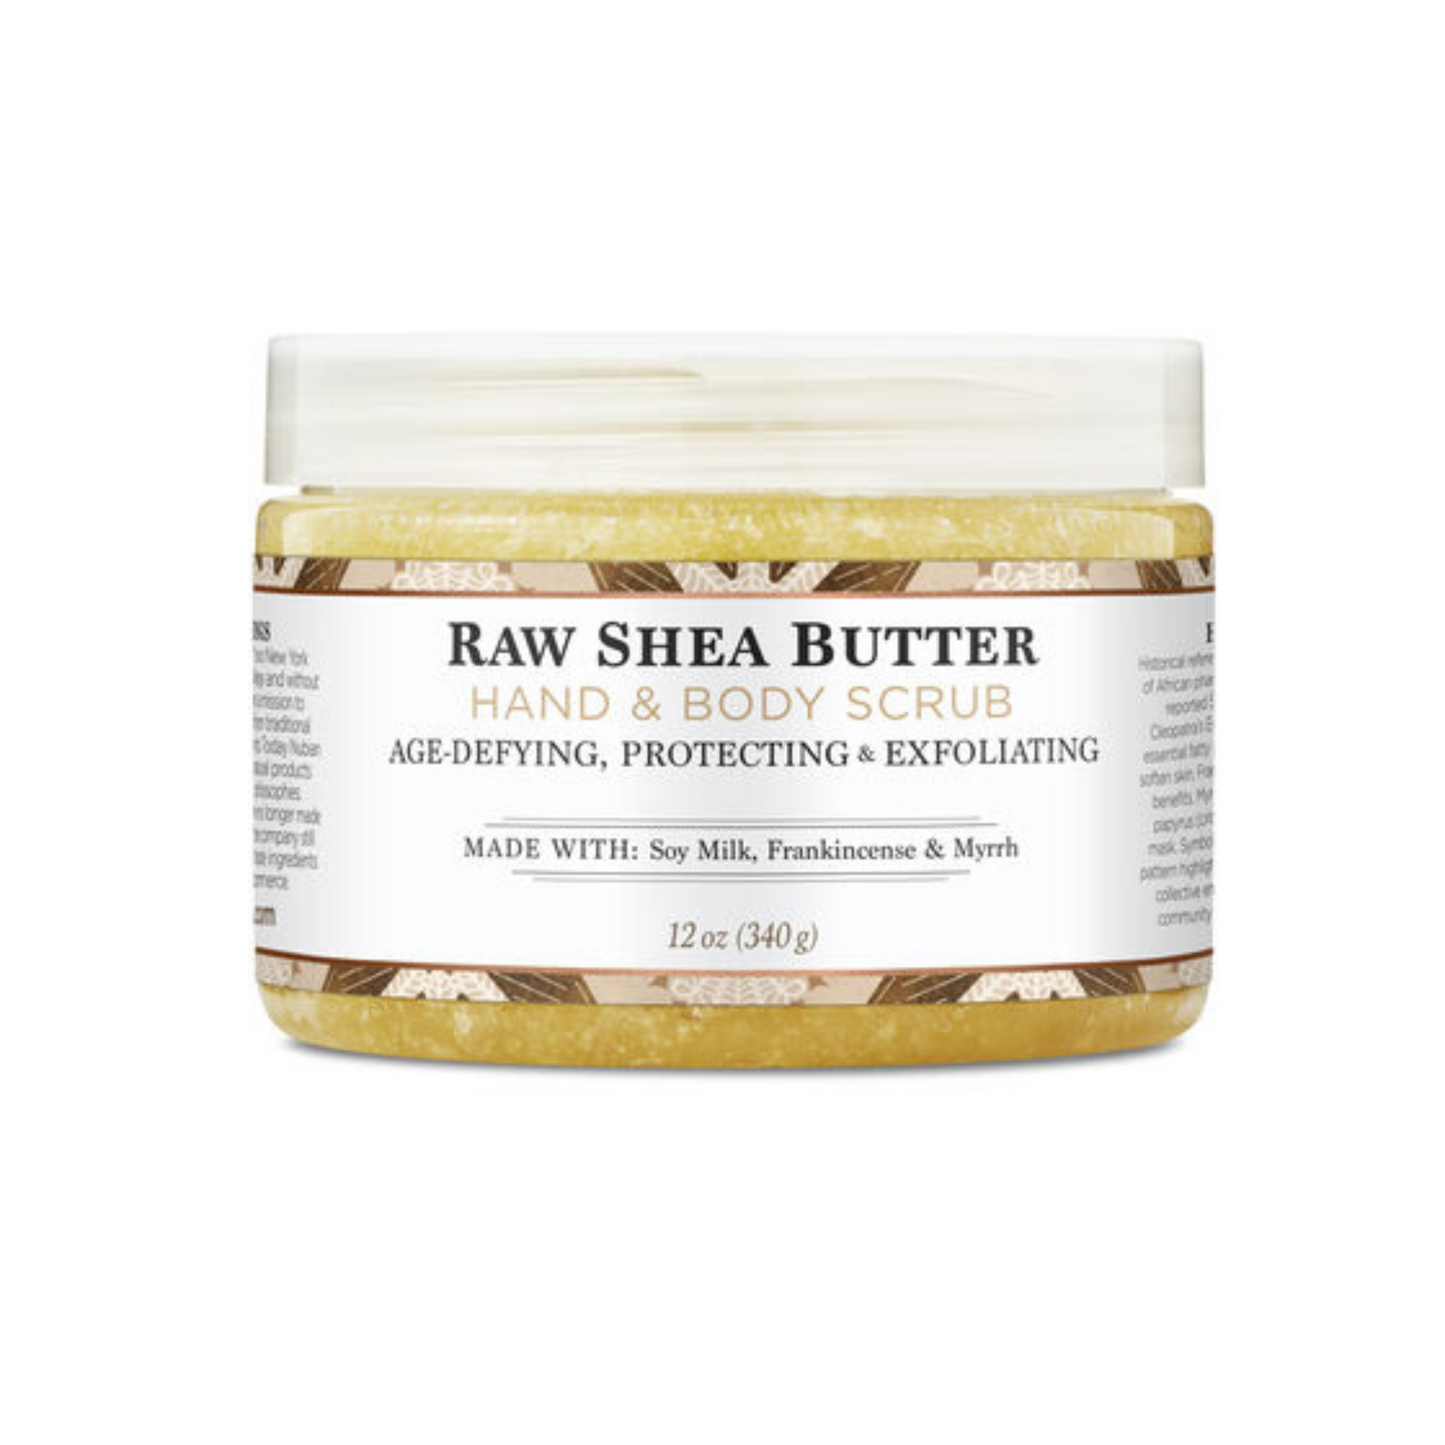 Primary Image of Nubian Heritage Raw Shea Butter Body Scrub